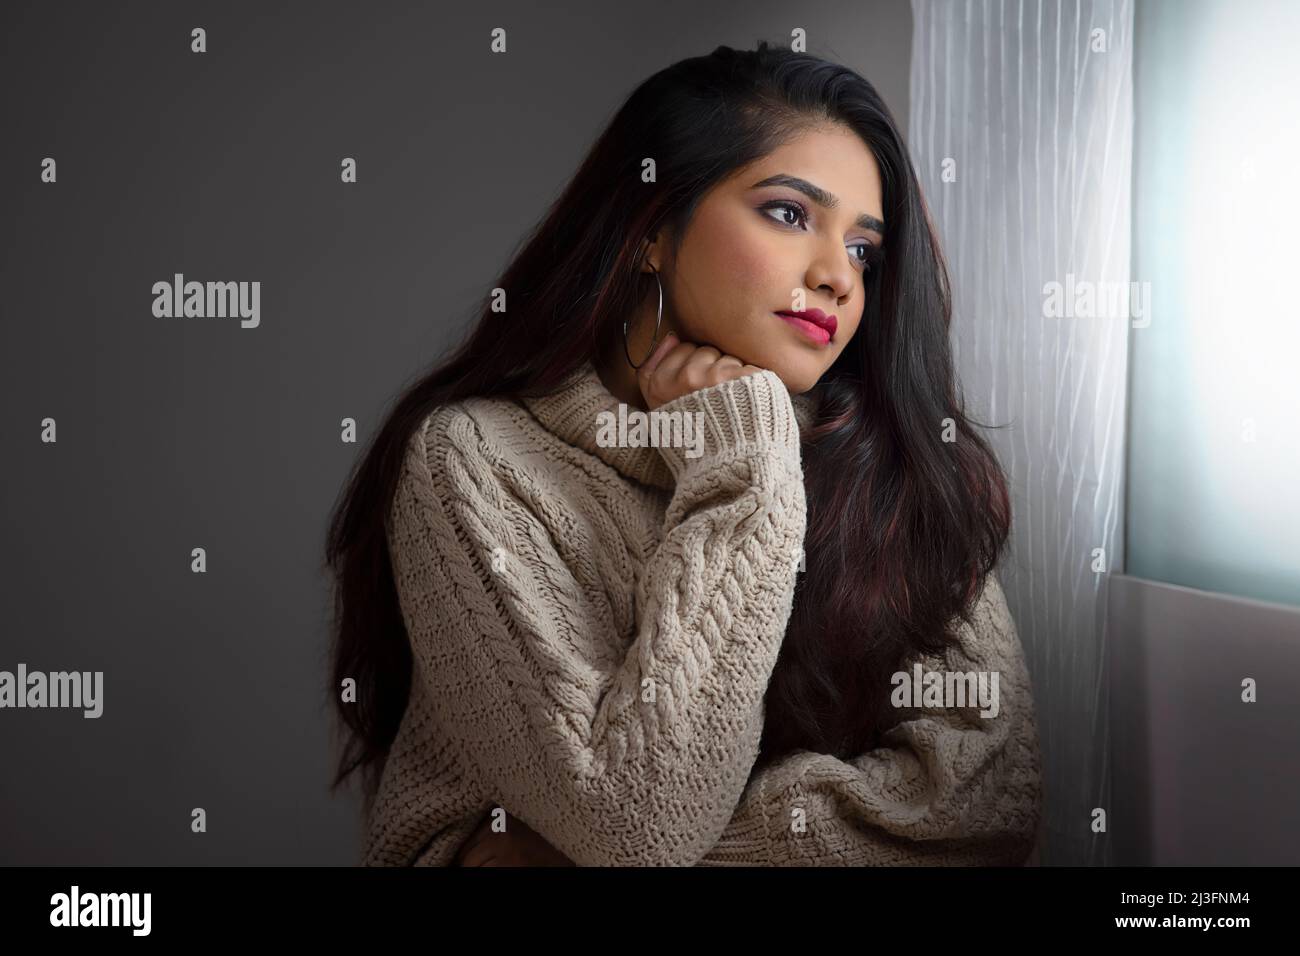 Young woman in winter cloth sitting near window and starring out with hand on chin Stock Photo